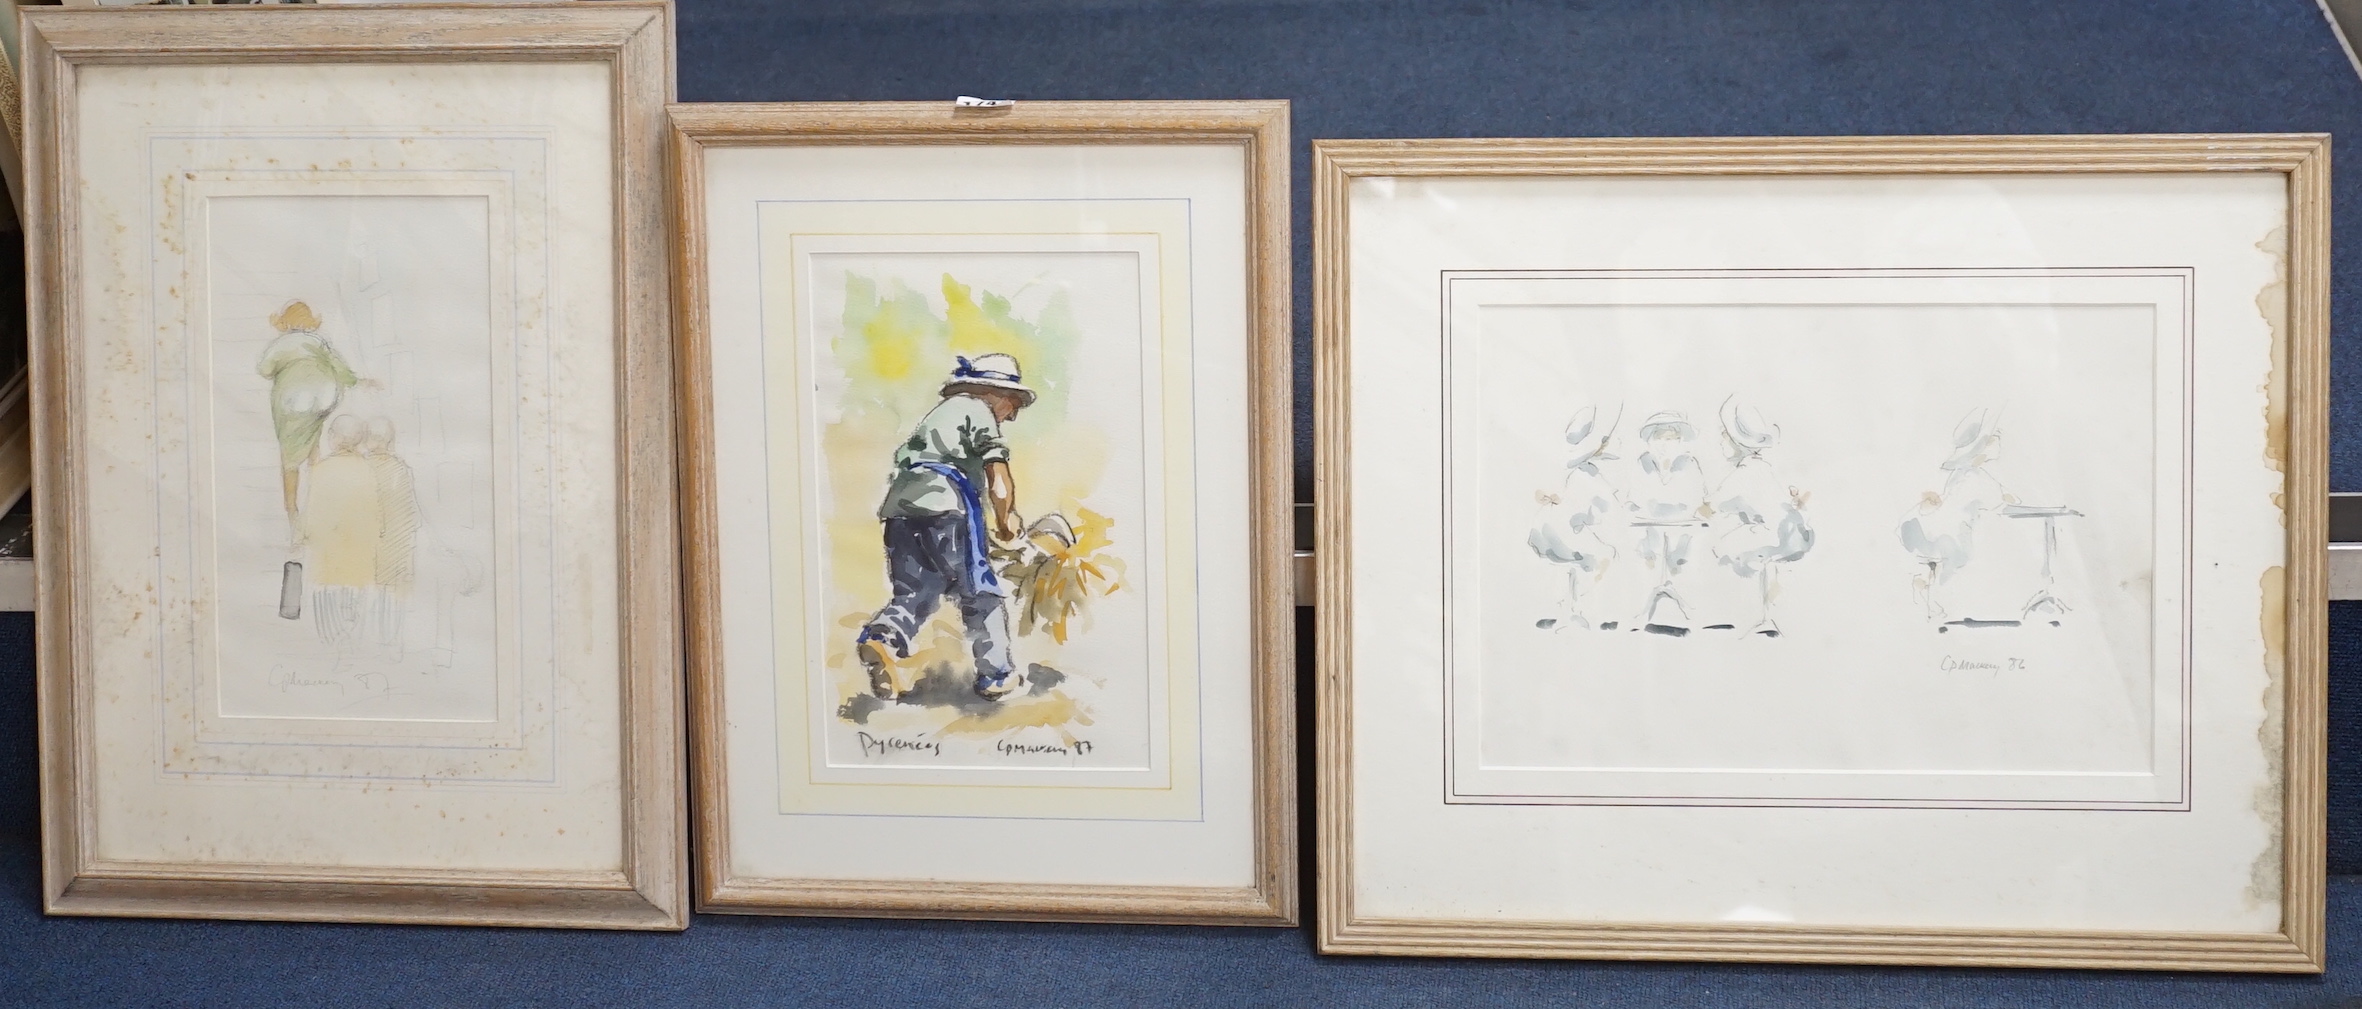 Charlie P. Mackesy (b.1962), three pencil and watercolour drawings, Ladies seated at tables, signed and dated '86, 24 x 25cm, 'Bedtime', dated '87, 29 x 16cm and 'Pyranees', dated '87, 28 x 18cm